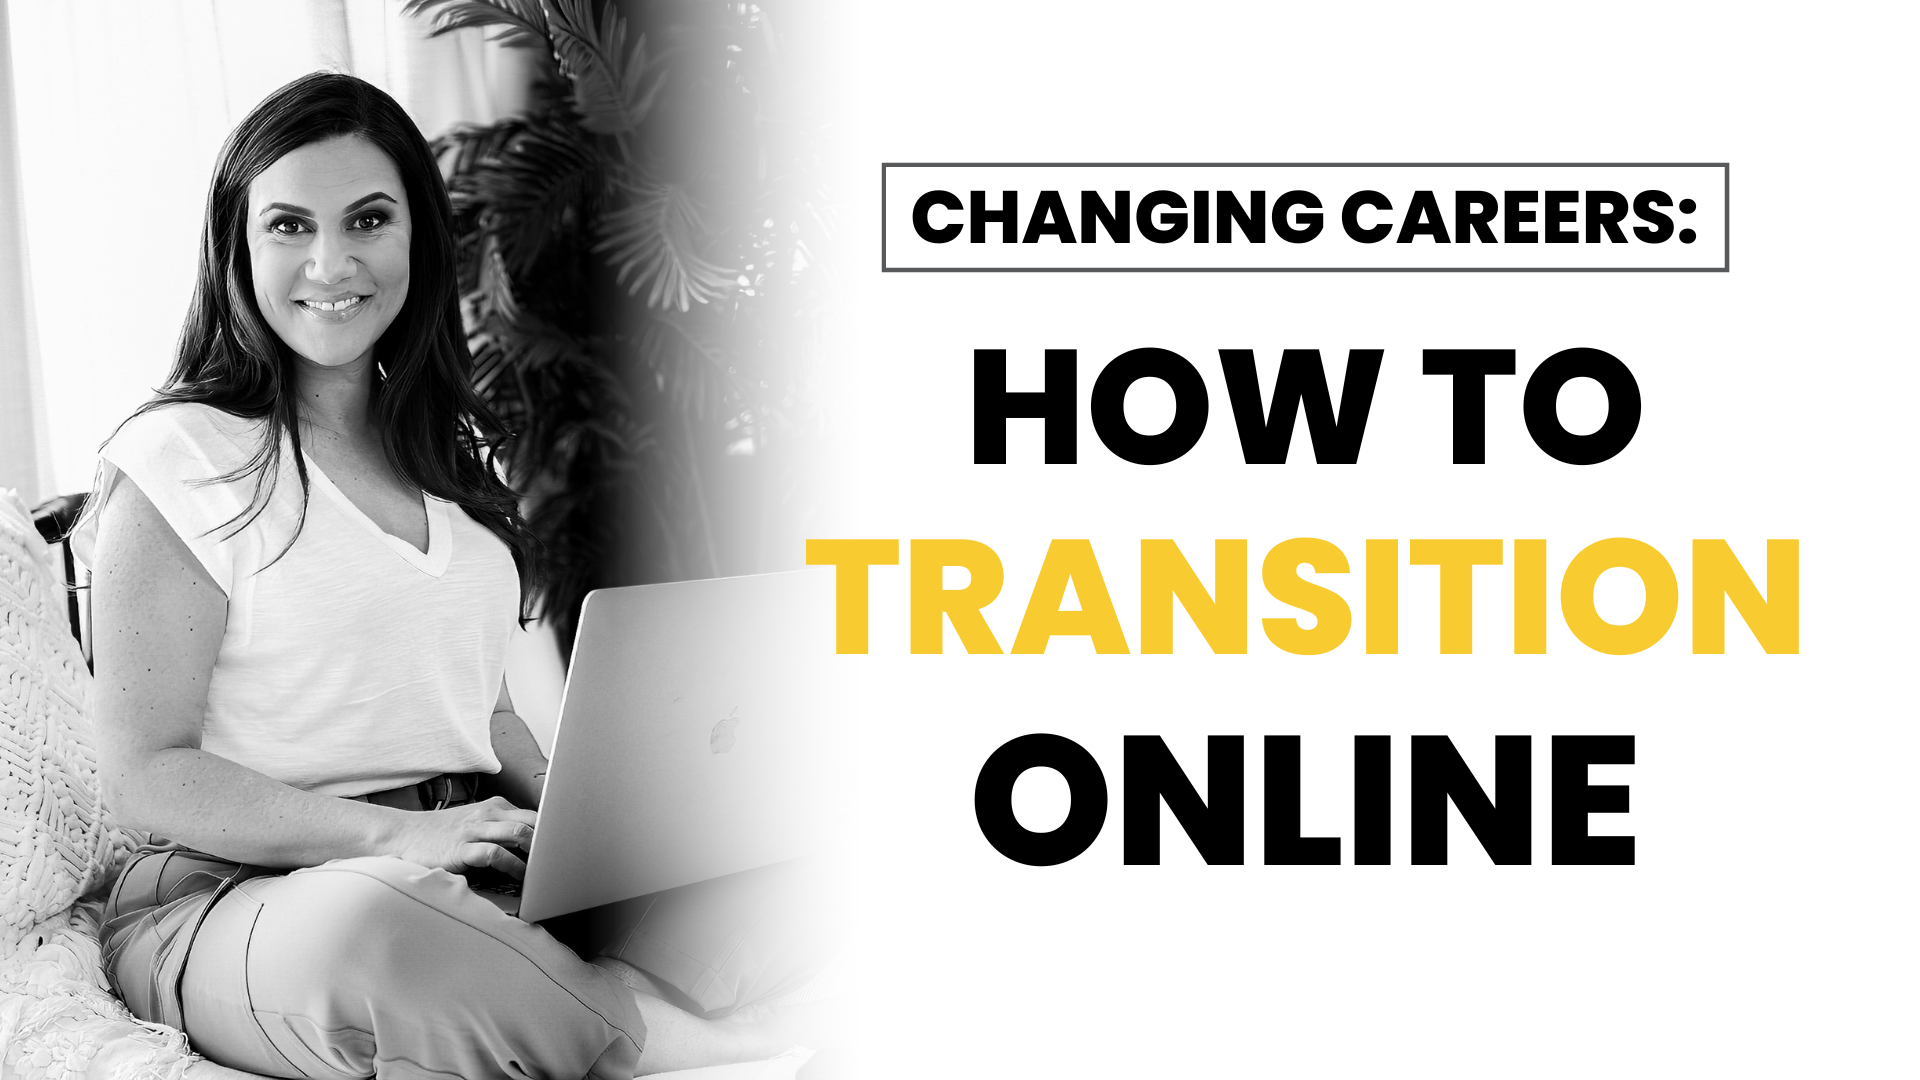 Changing Careers: How to transition online